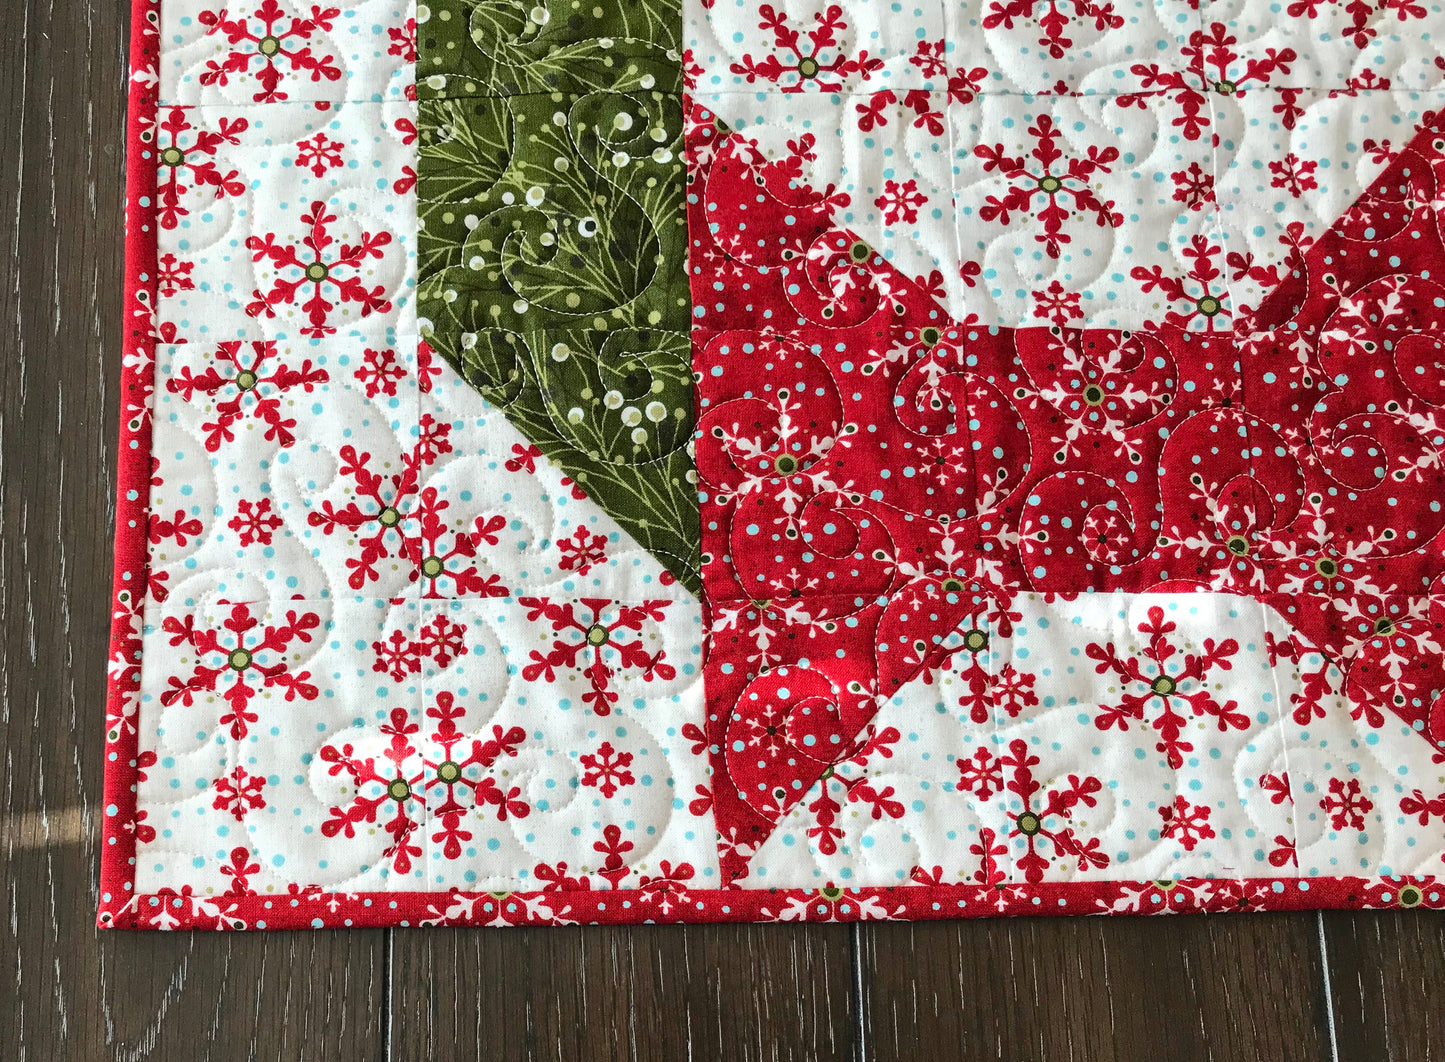 Christmas Wreath Table Runner and Table Topper Pattern - Digital Pattern - Handmade Quilts, Digital Patterns, and Home Décor items online - Cuddle Cat Quiltworks